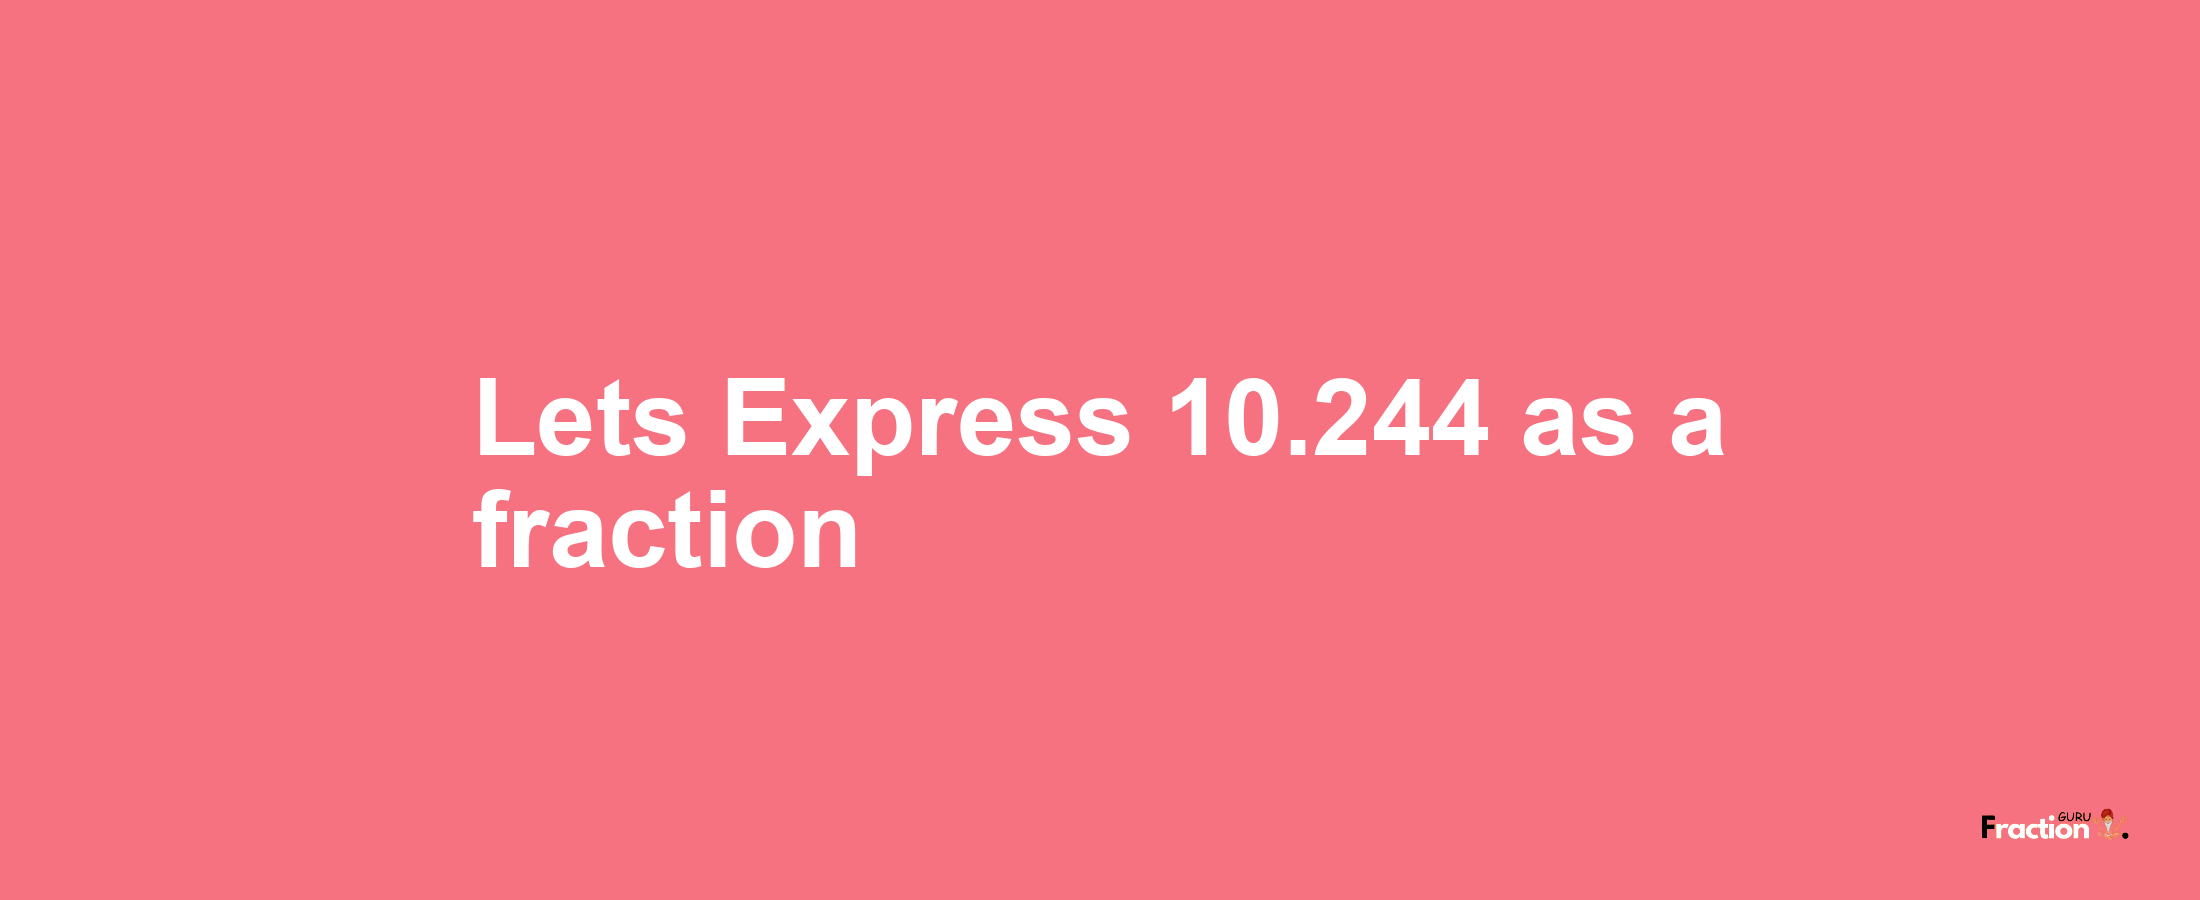 Lets Express 10.244 as afraction